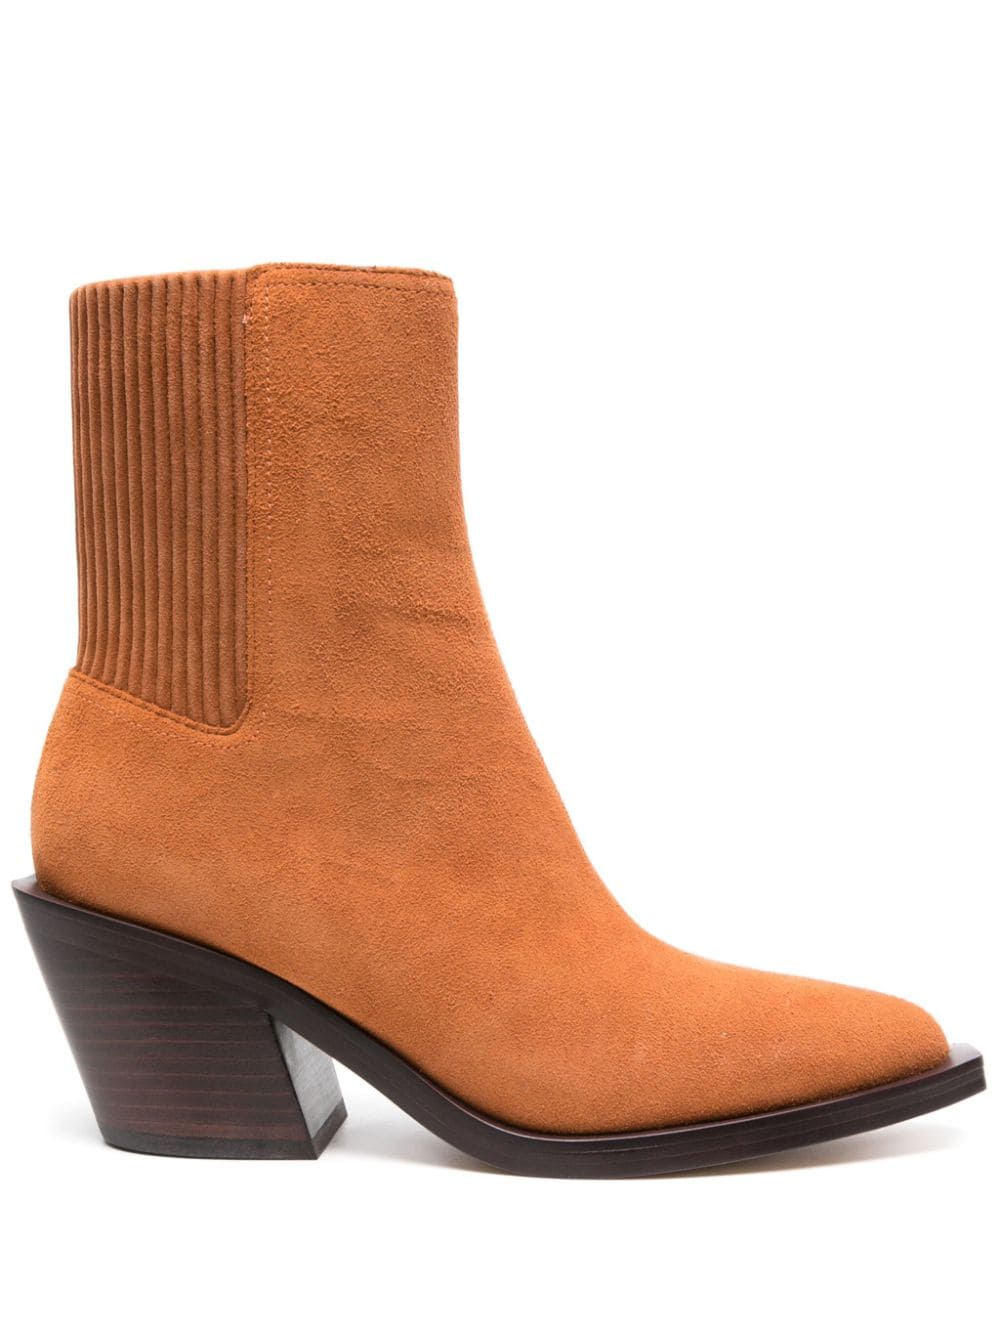 Prestyn 80mm suede ankle boots